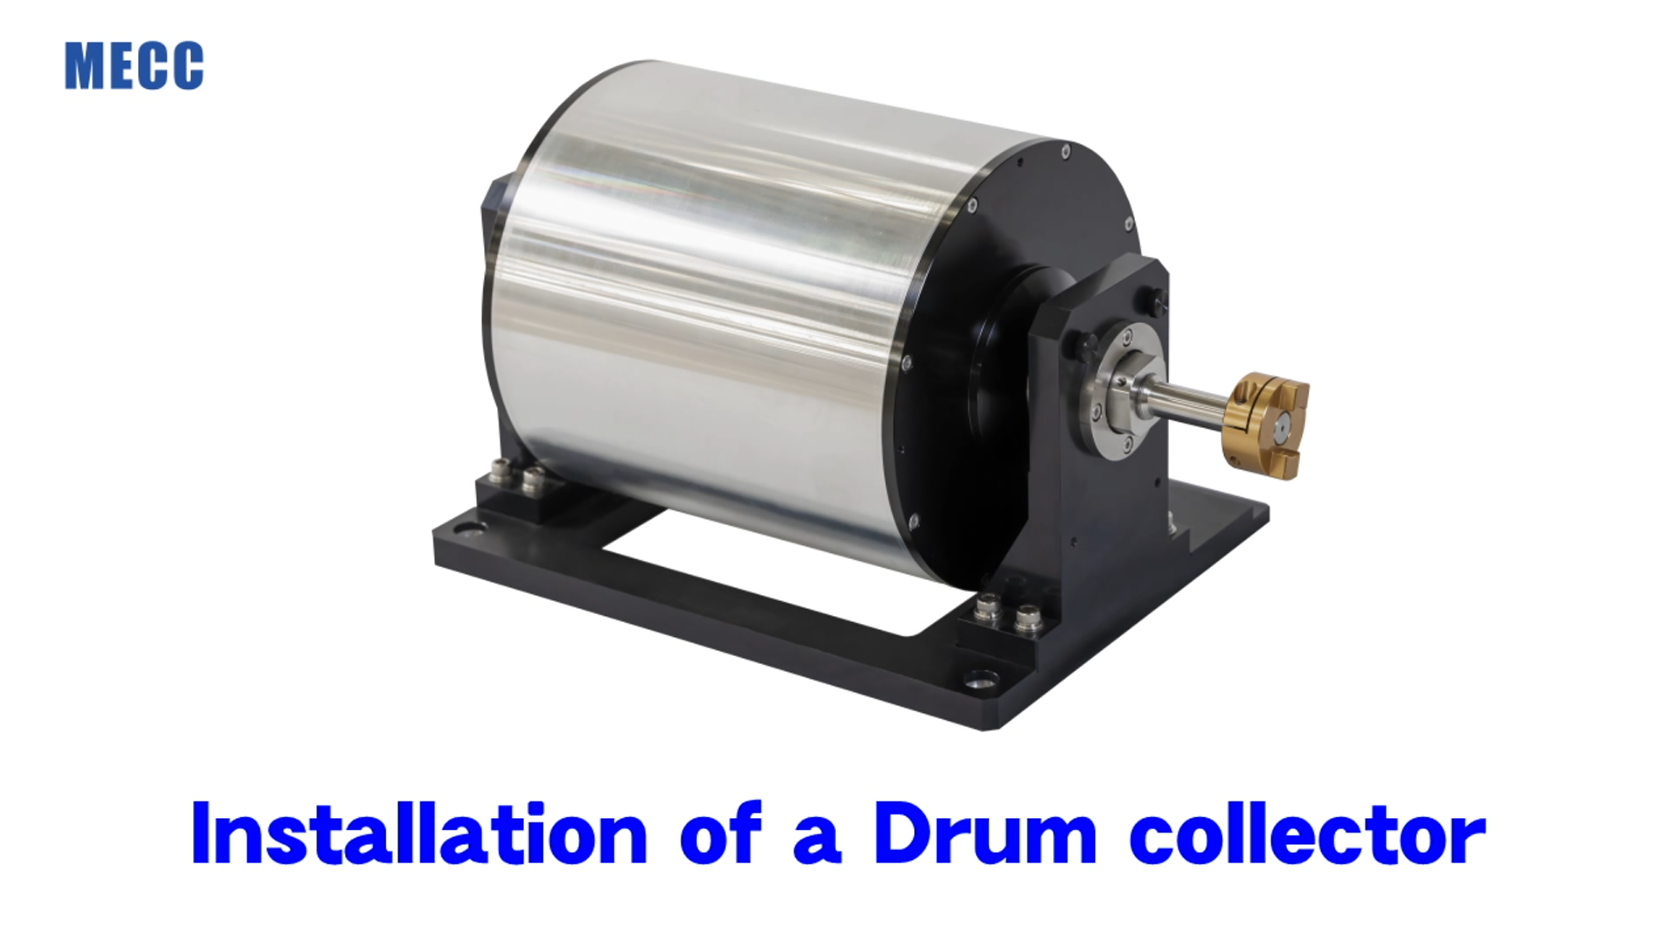 Possible to make an aligned sheet!! Drum collector.